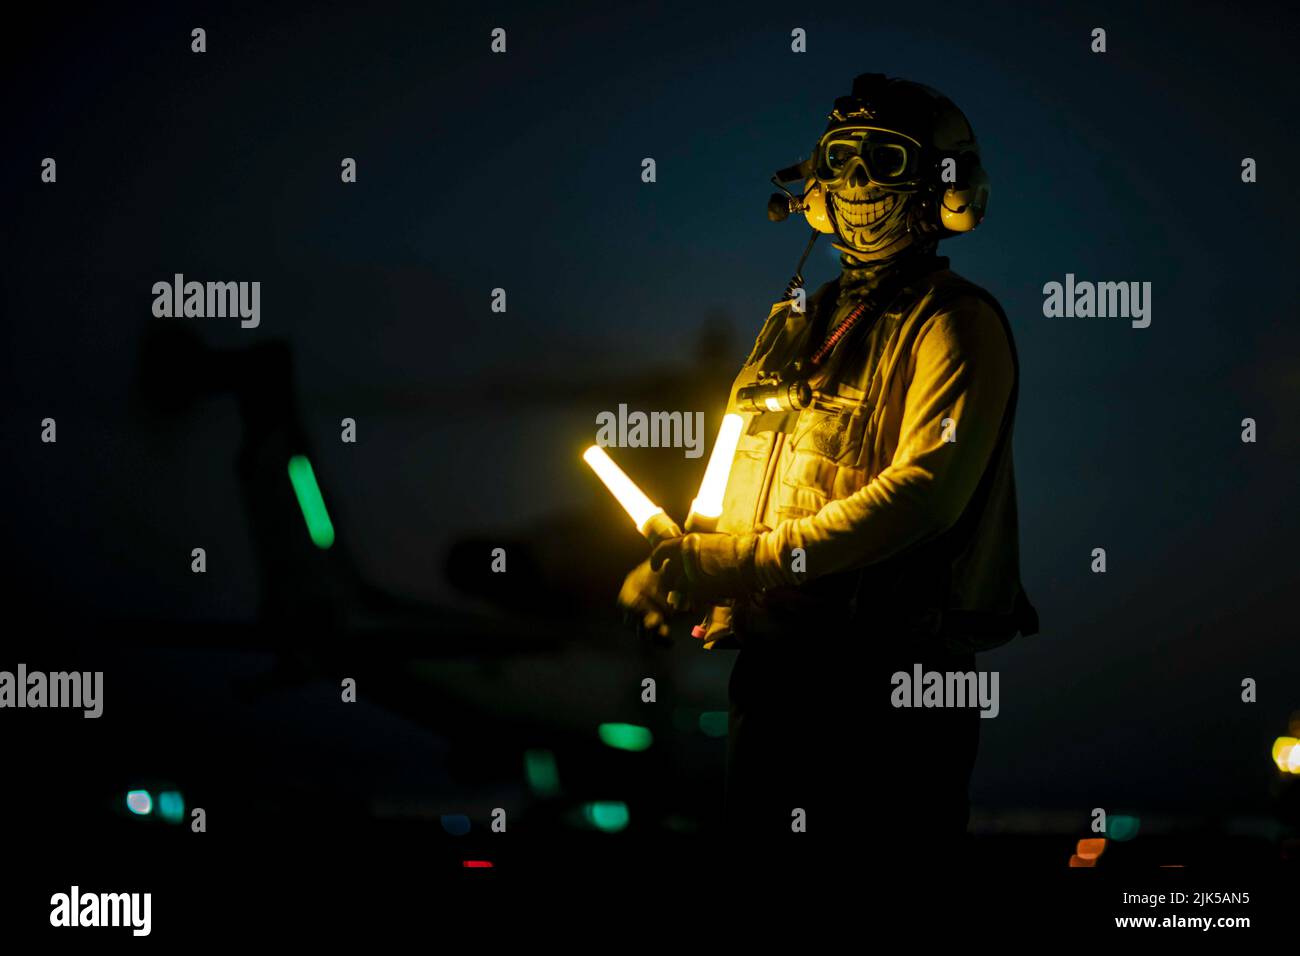 July 8, 2022 - Atlantic Ocean - Aviation Boatswain's Mate (Handling) 3rd Class Ronald Saunders prepares to direct an AH-1Z Viper helicopter, attached to the 22nd Marine Expeditionary Unit, on the flight deck of the Wasp-class amphibious assault ship USS Kearsarge (LHD 3) during night flight operations July 14, 2022. The Kearsarge Amphibious Ready Group and embarked 22nd Marine Expeditionary Unit, under the command and control of Task Force 61/2, is on a scheduled deployment in the U.S. Naval Forces Europe area of operations, employed by U.S. Sixth Fleet to defend U.S., allied and partner inter Stock Photo